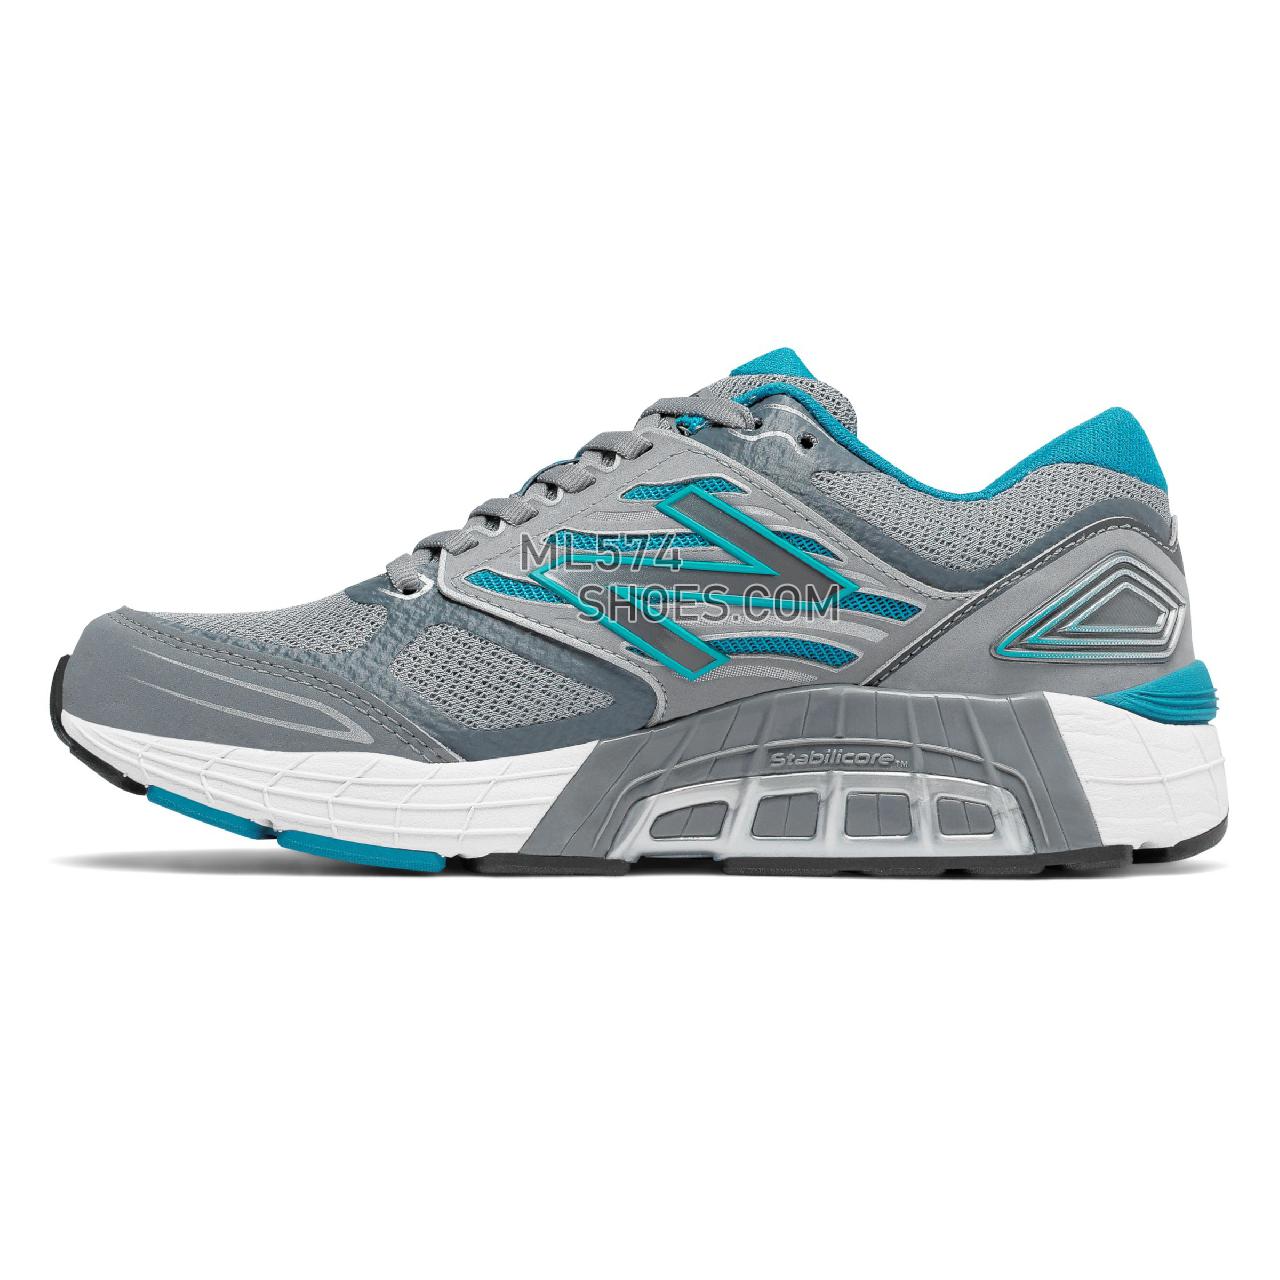 New Balance 1340v3 - Women's 1340 - Running Grey with Pisces - W1340GB3